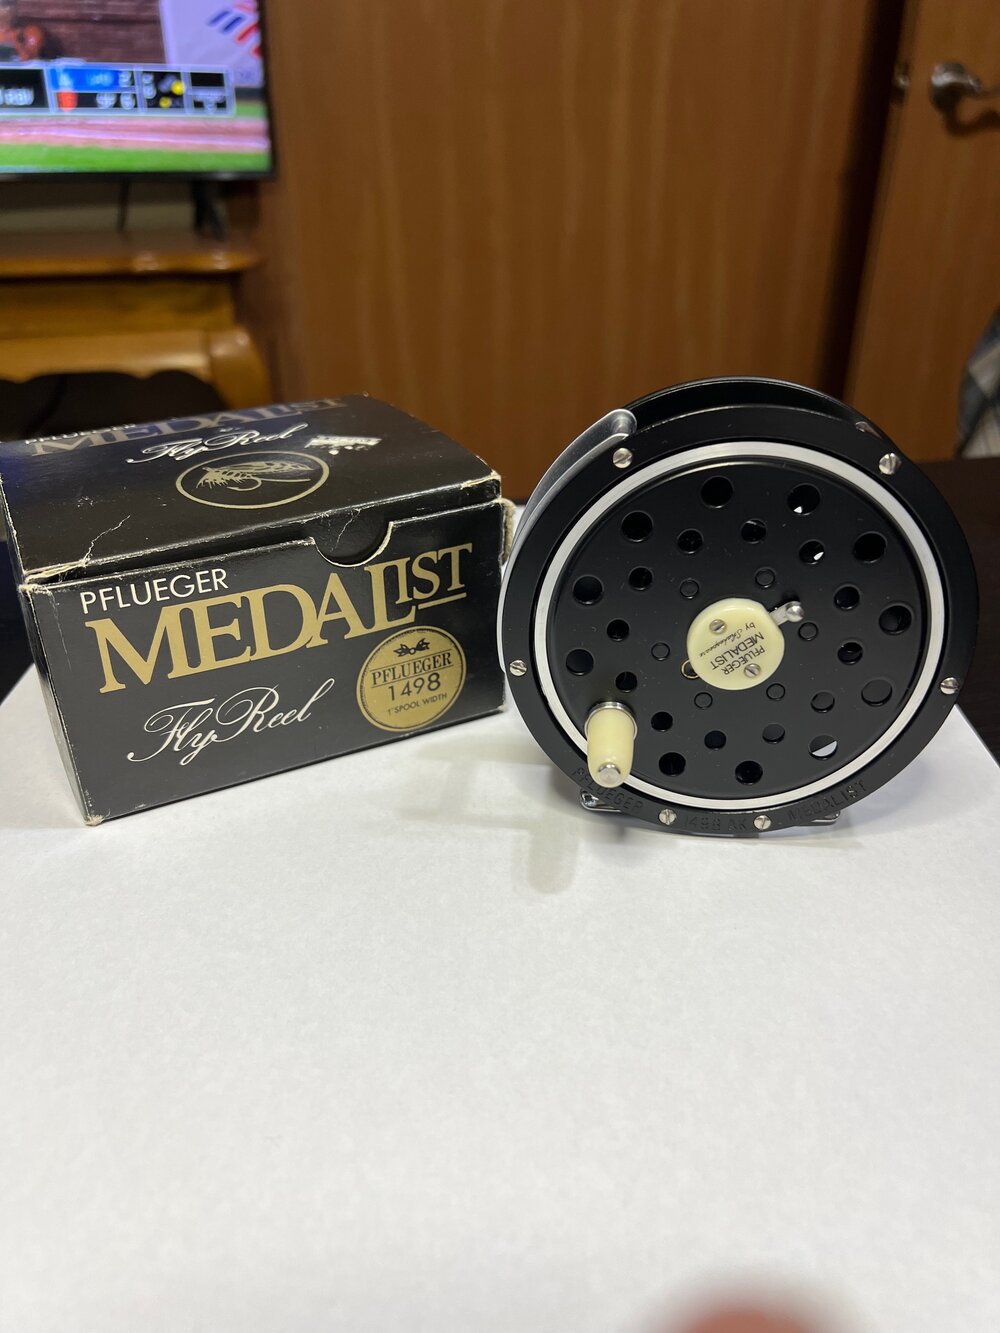 Pflueger Medalist 1498 AK Fly Reel by Shakespeare with Box